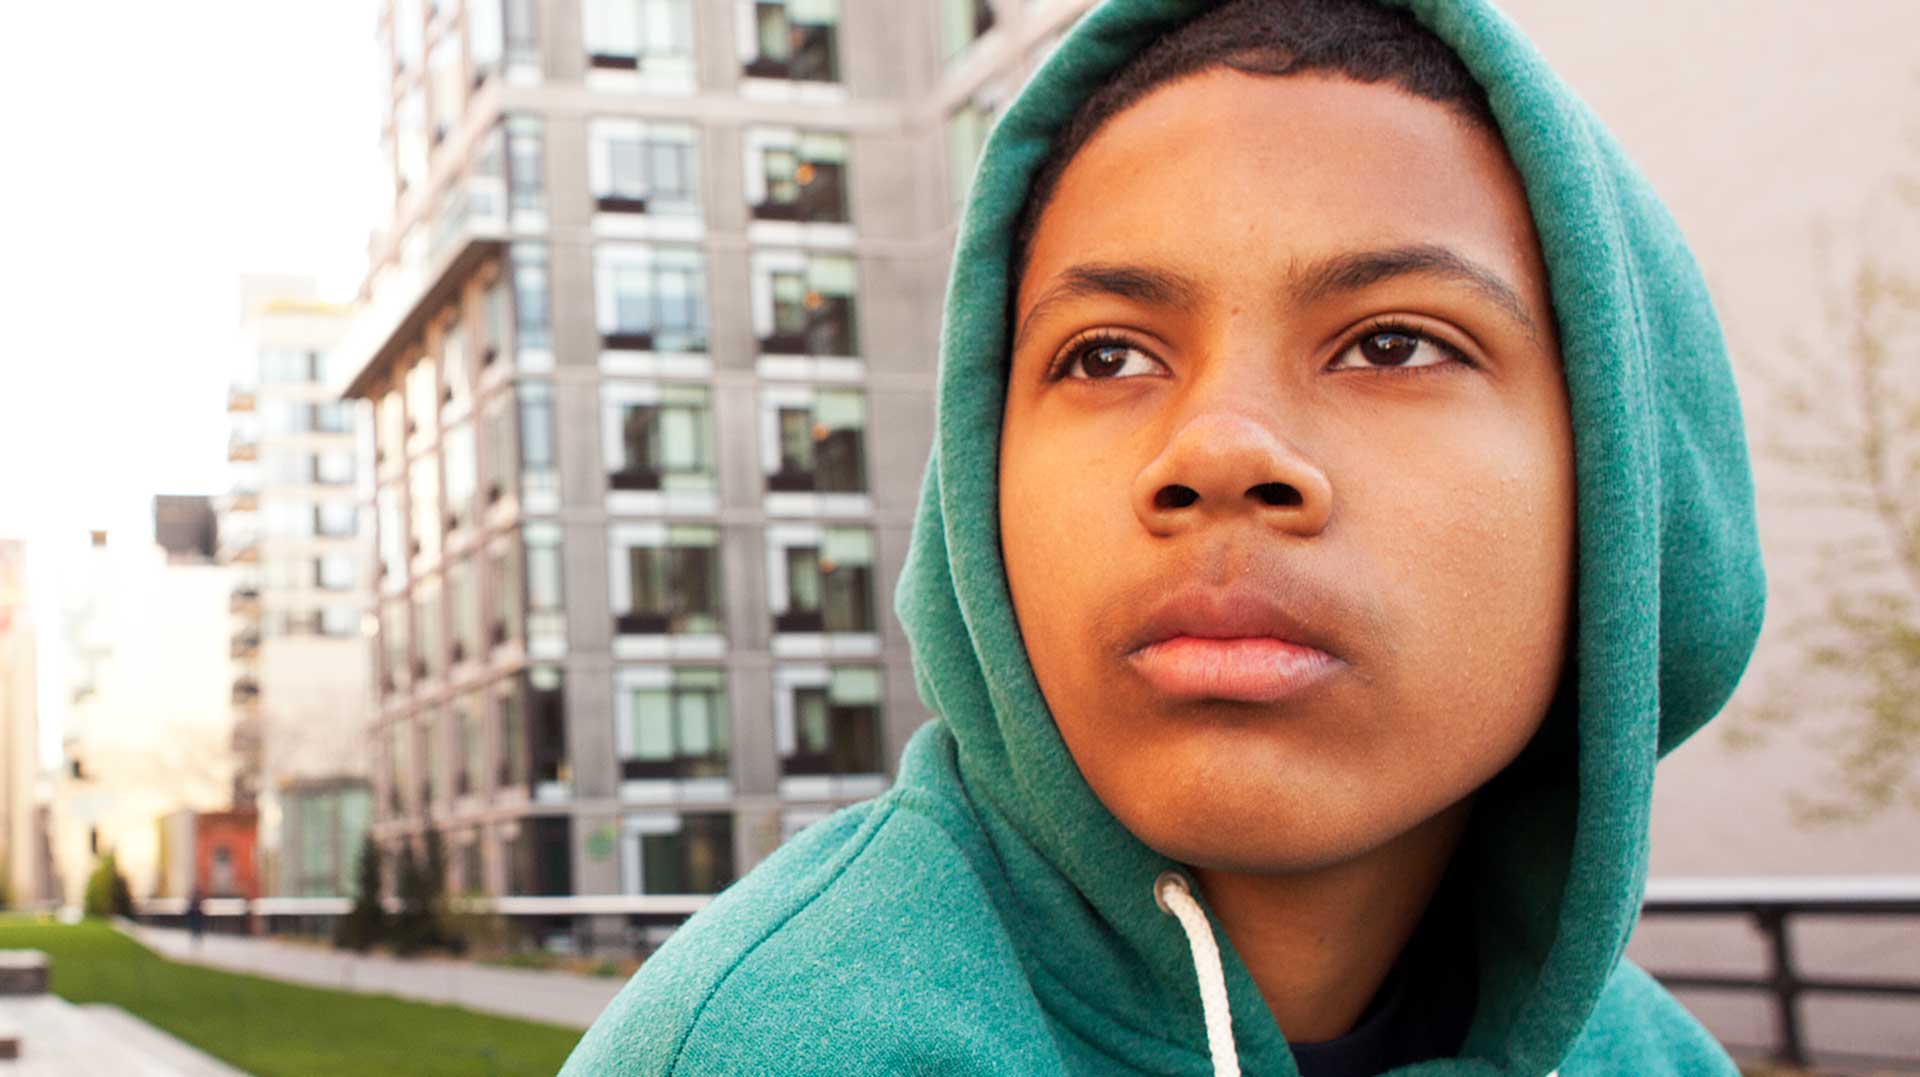 Portrait of boy in a hoodie looking contemplatively